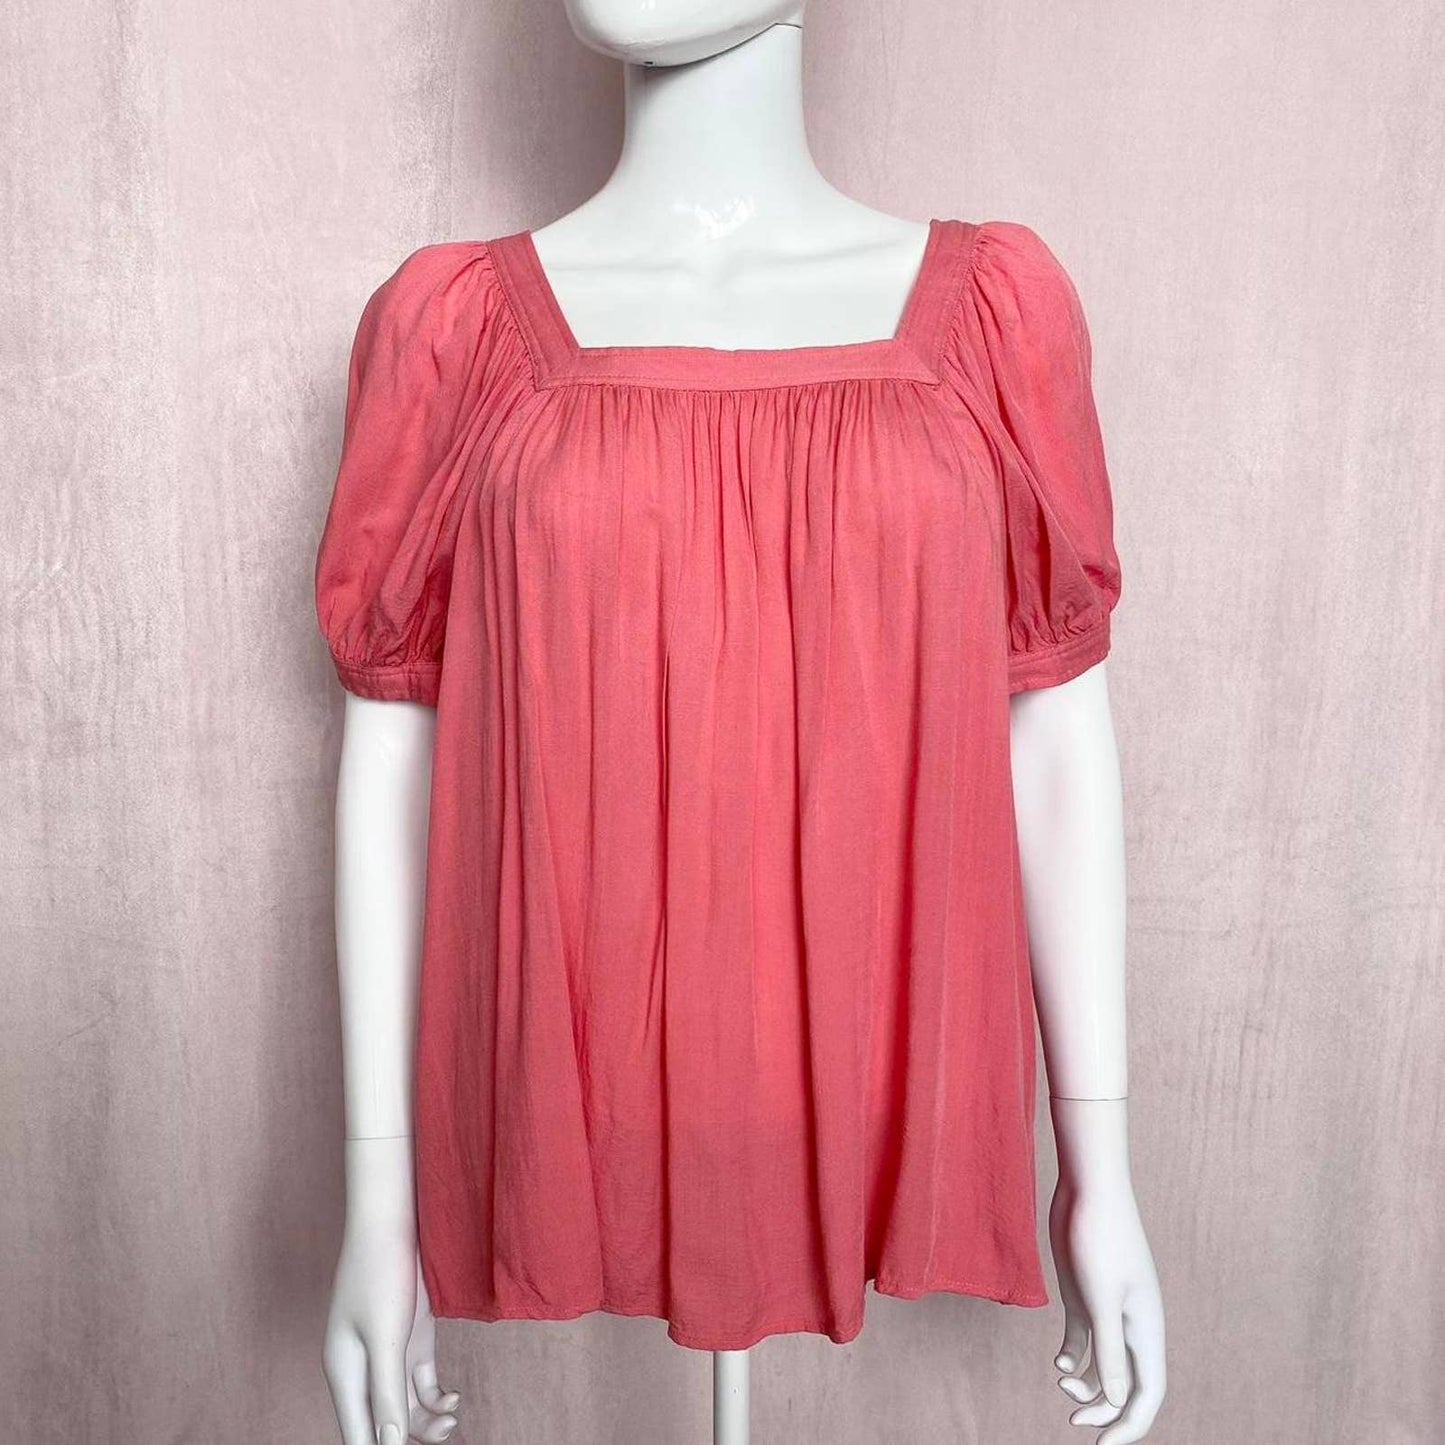 Secondhand Kori America Peach Puff Sleeve Flowy Top, Size Small